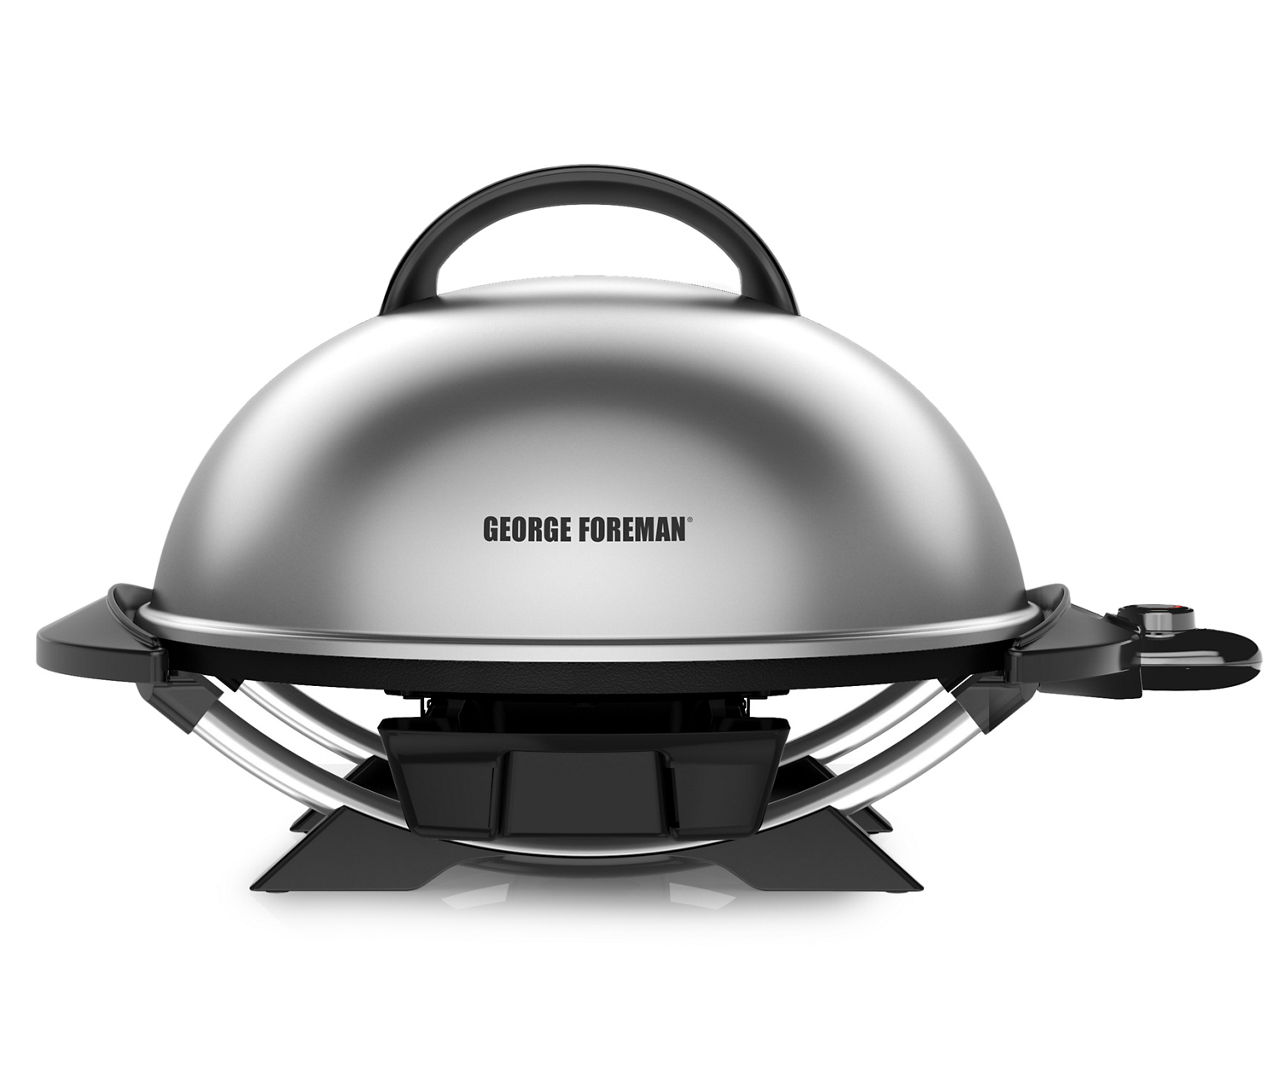 This George Foreman Indoor Outdoor BBQ Grill cooks delicious food